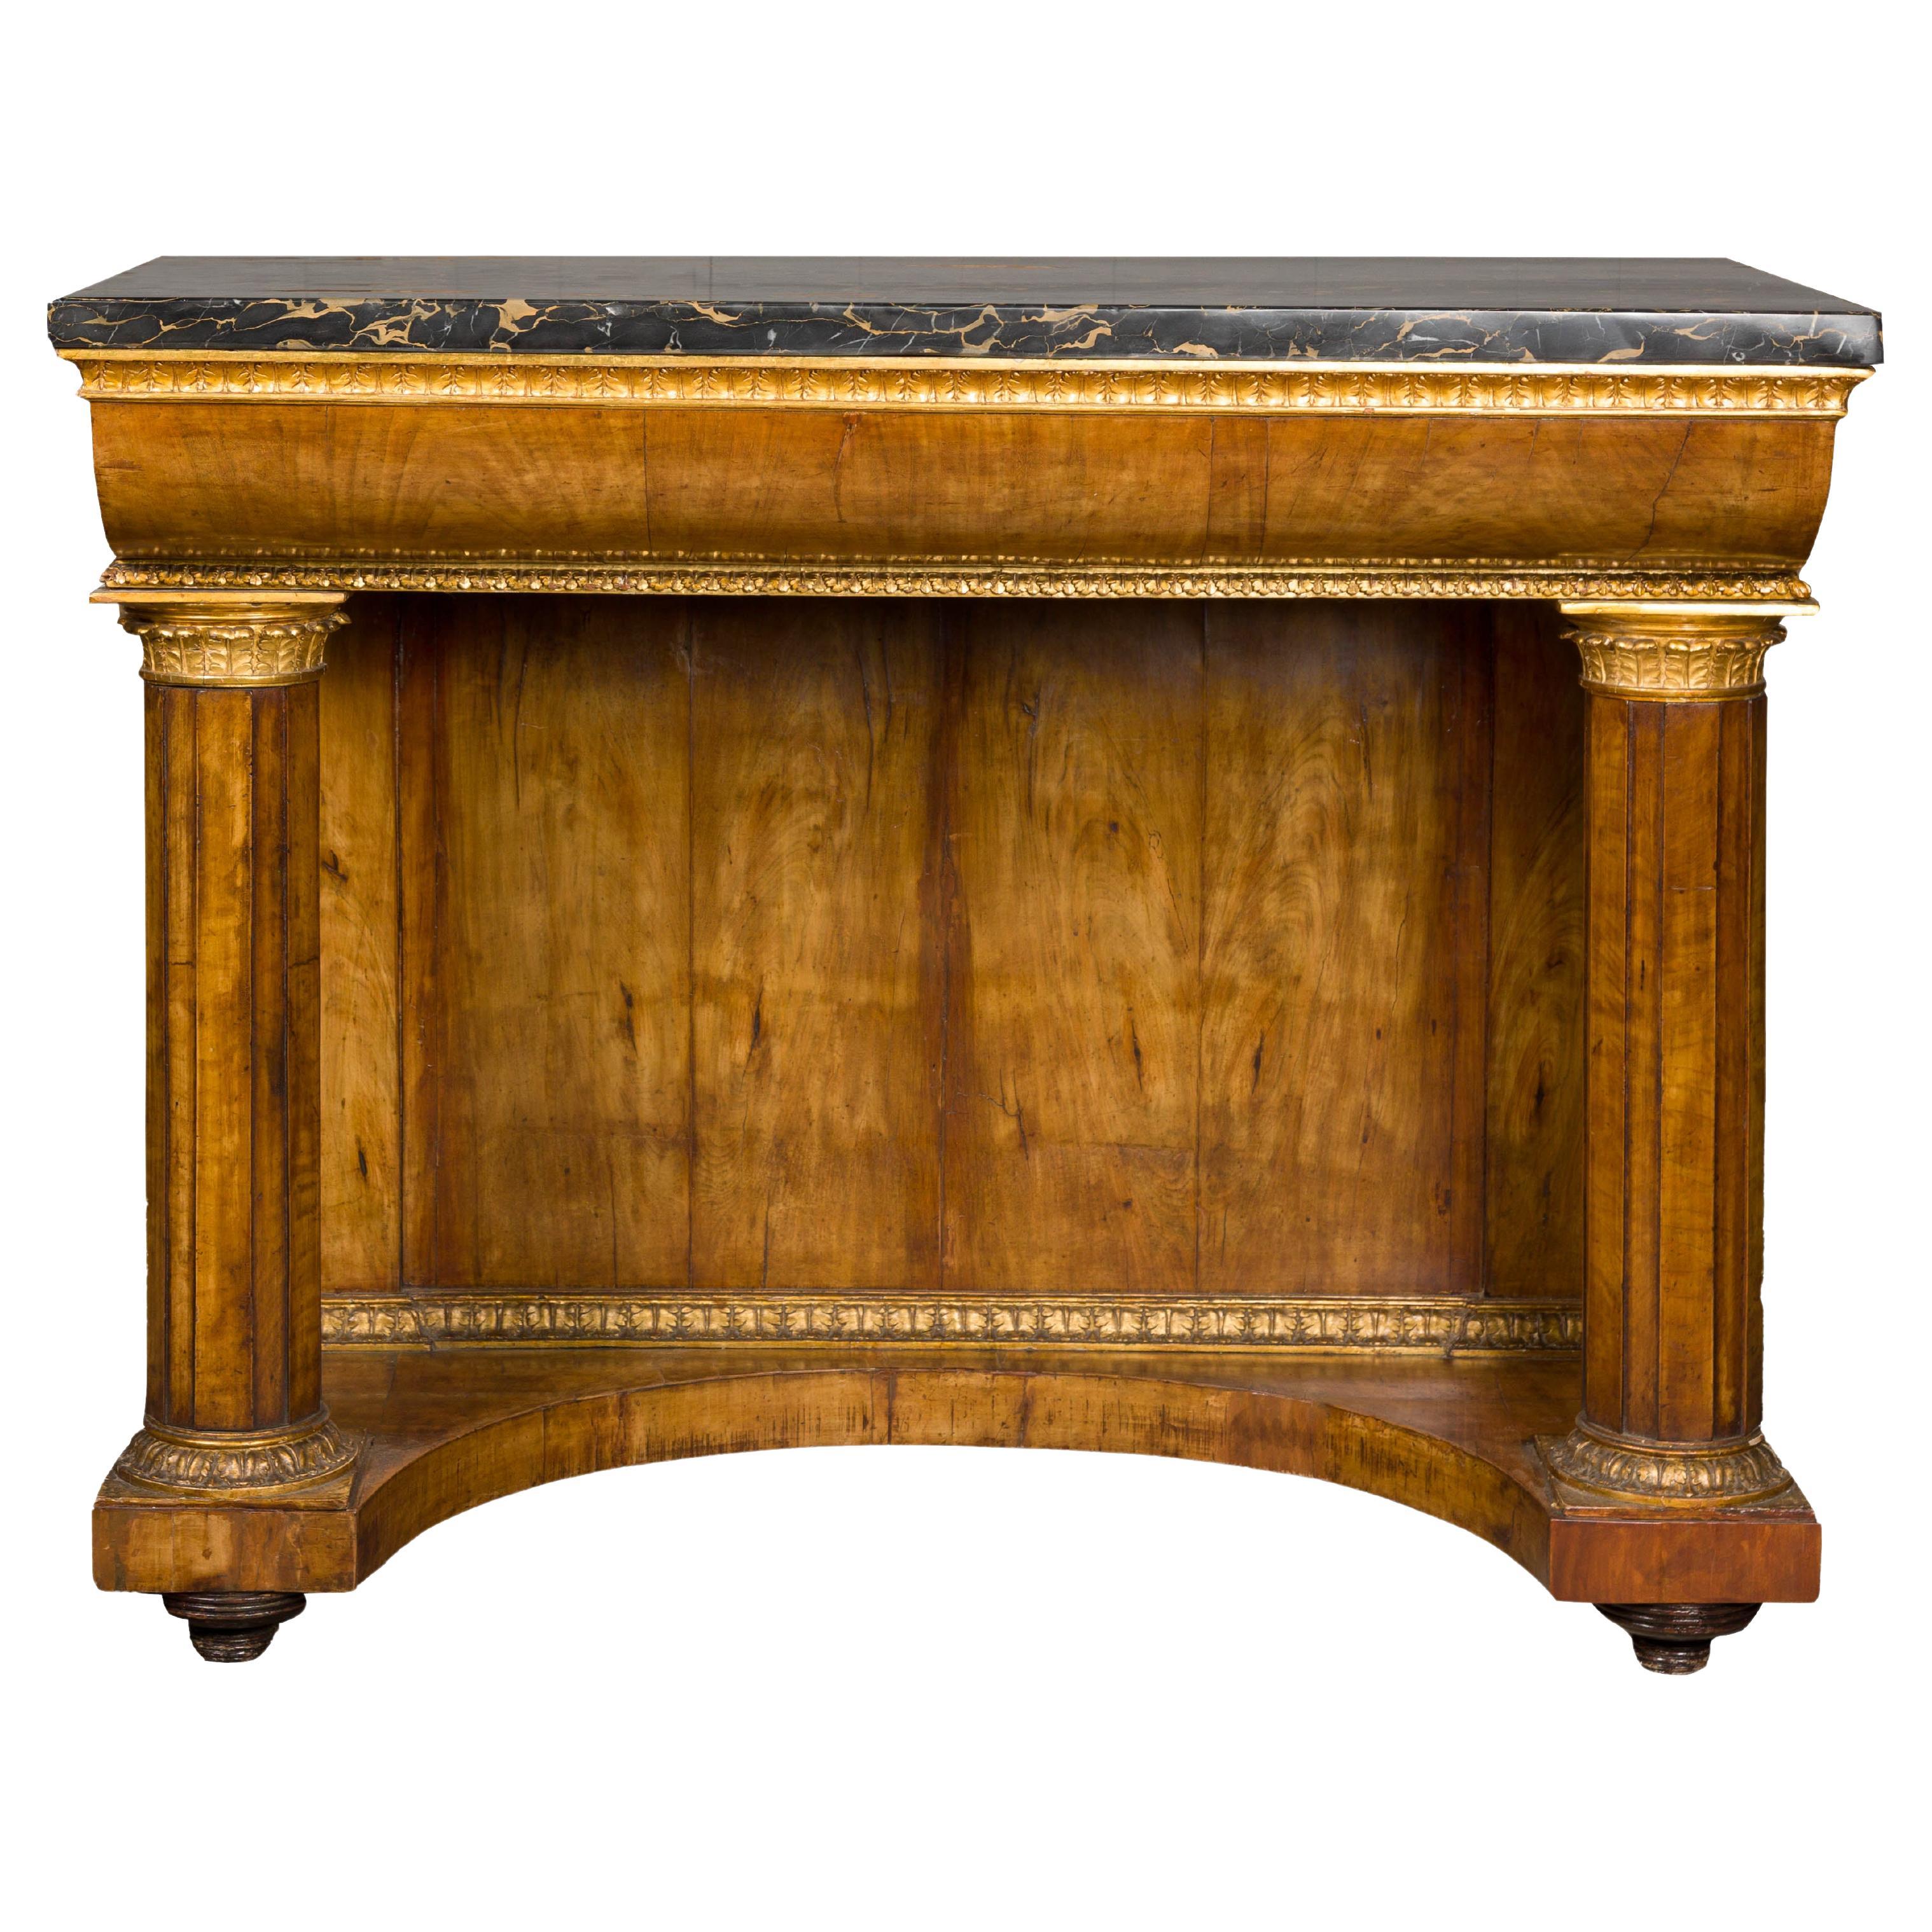 French Napoléon III Period 1860s Walnut Console Table with Original Marble Top For Sale